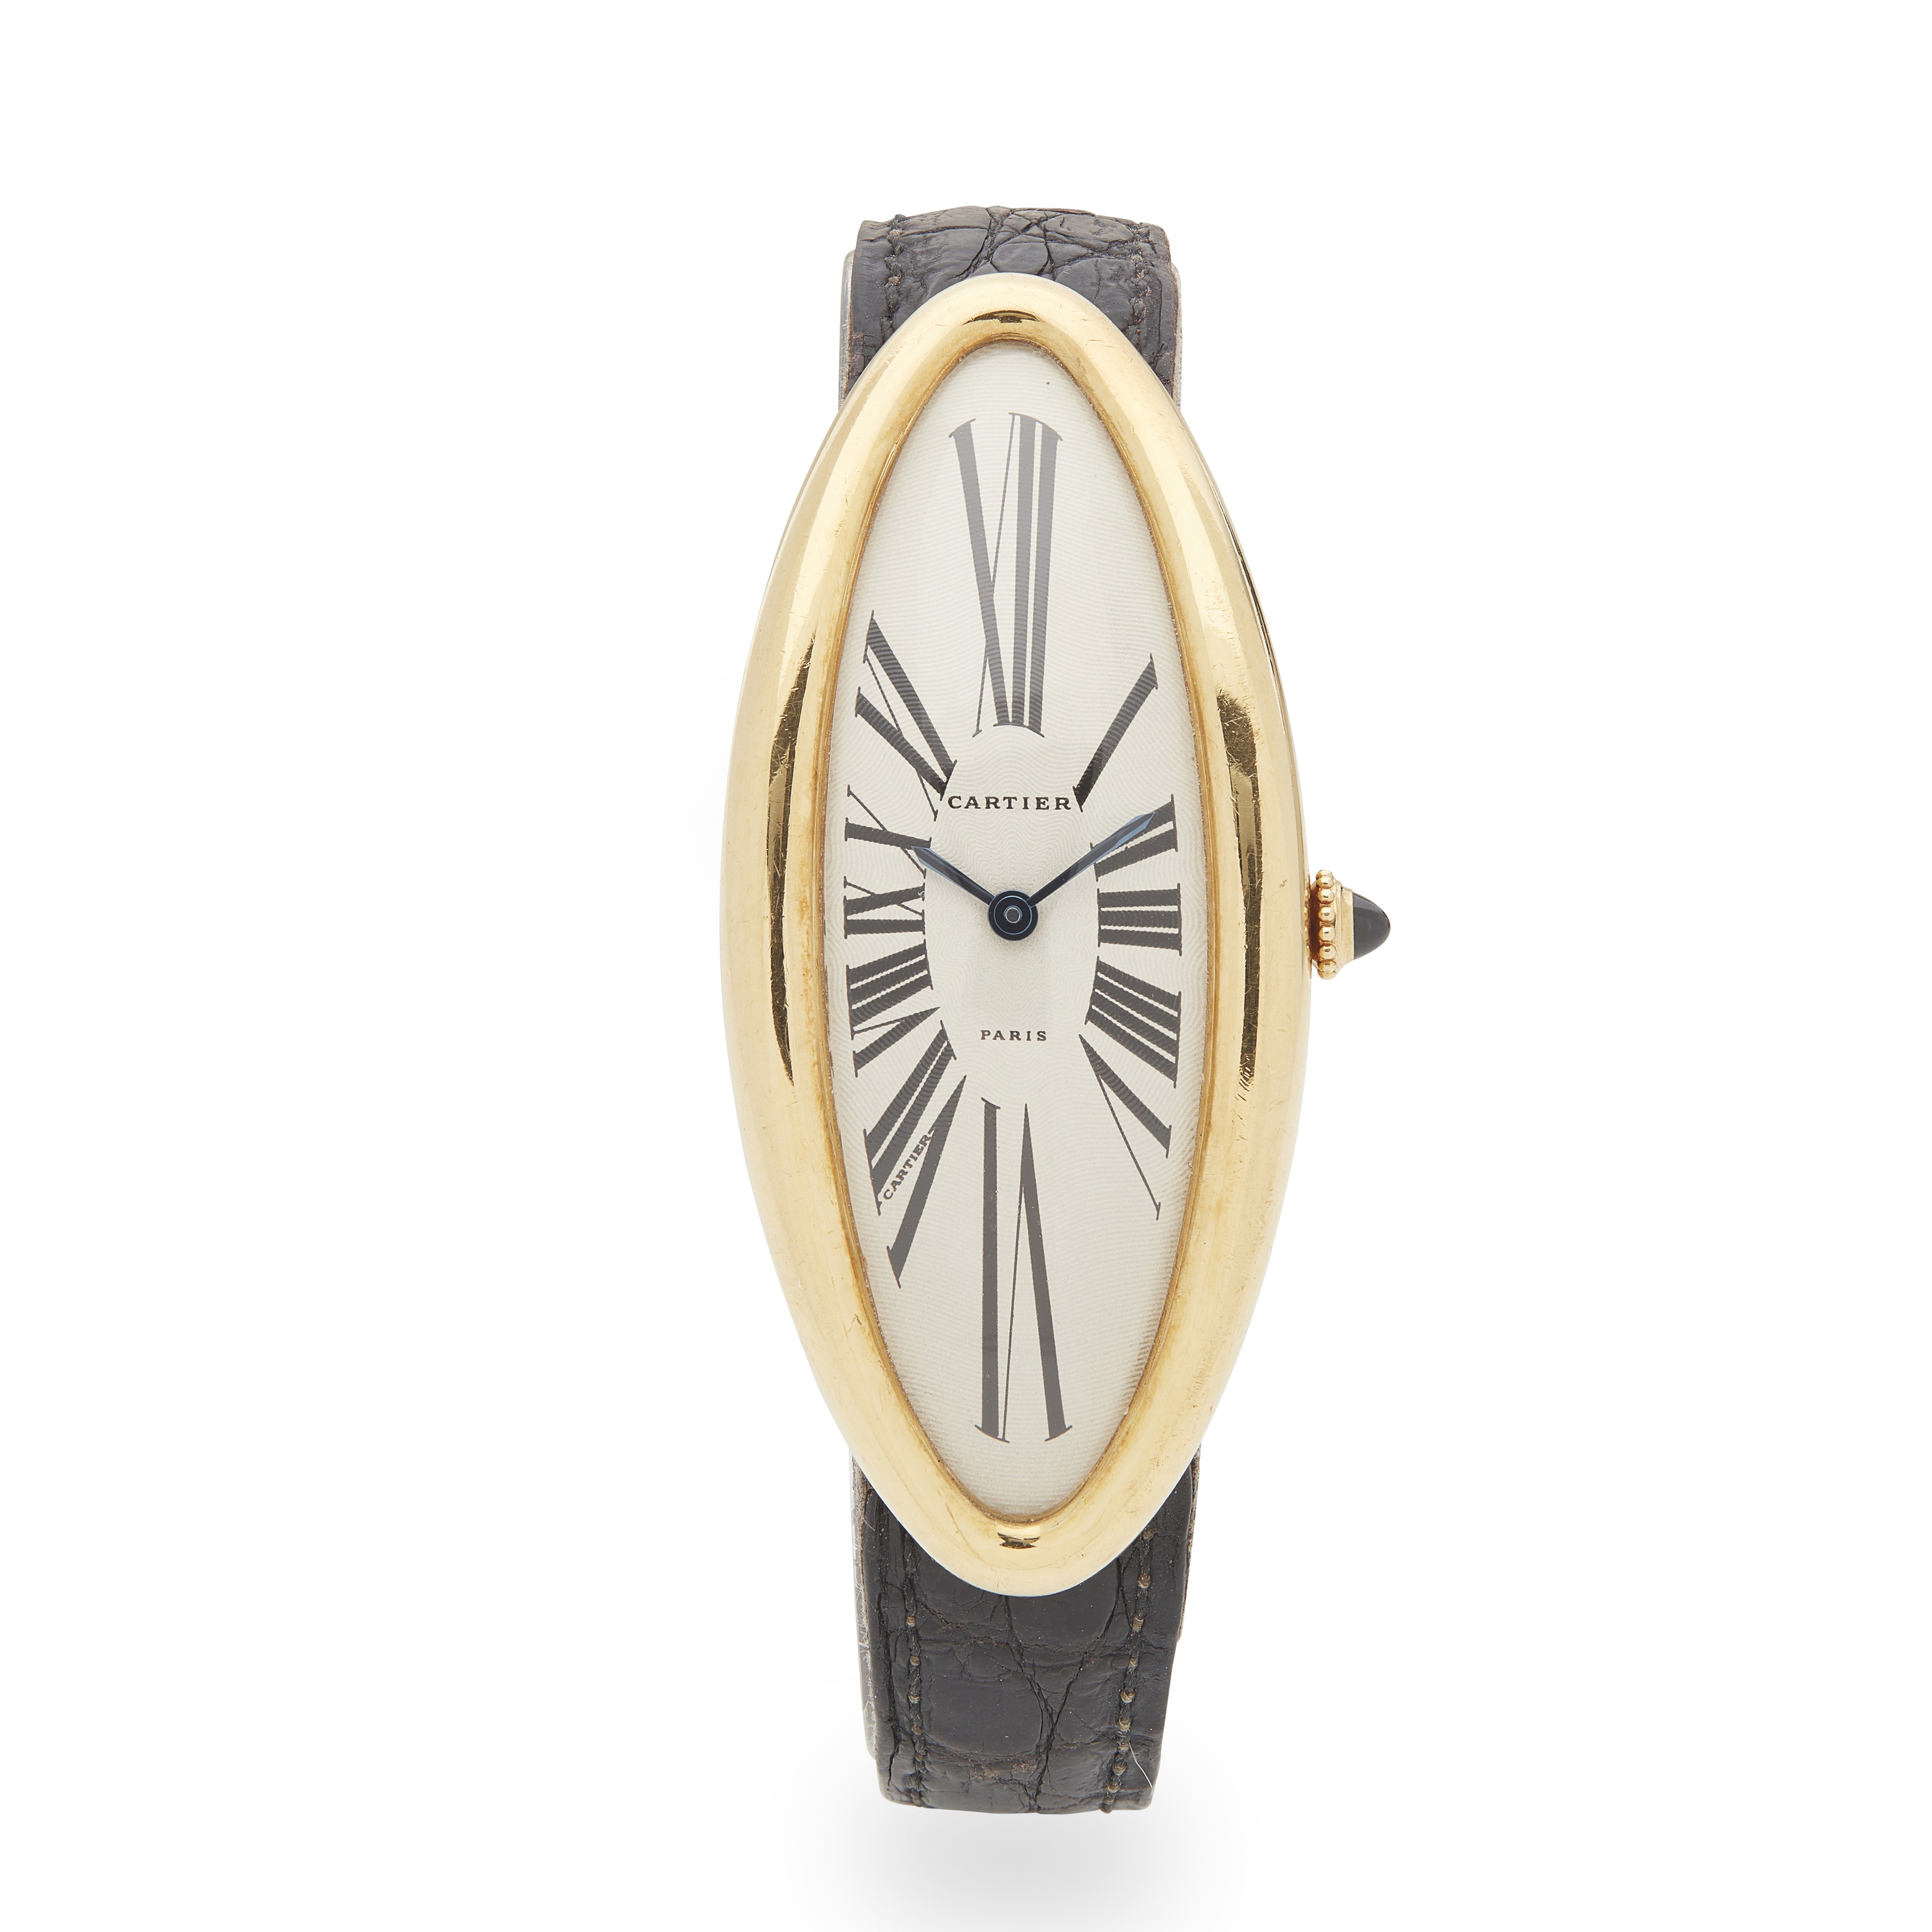 Cartier Watches at Auction | Lyon & Turnbull